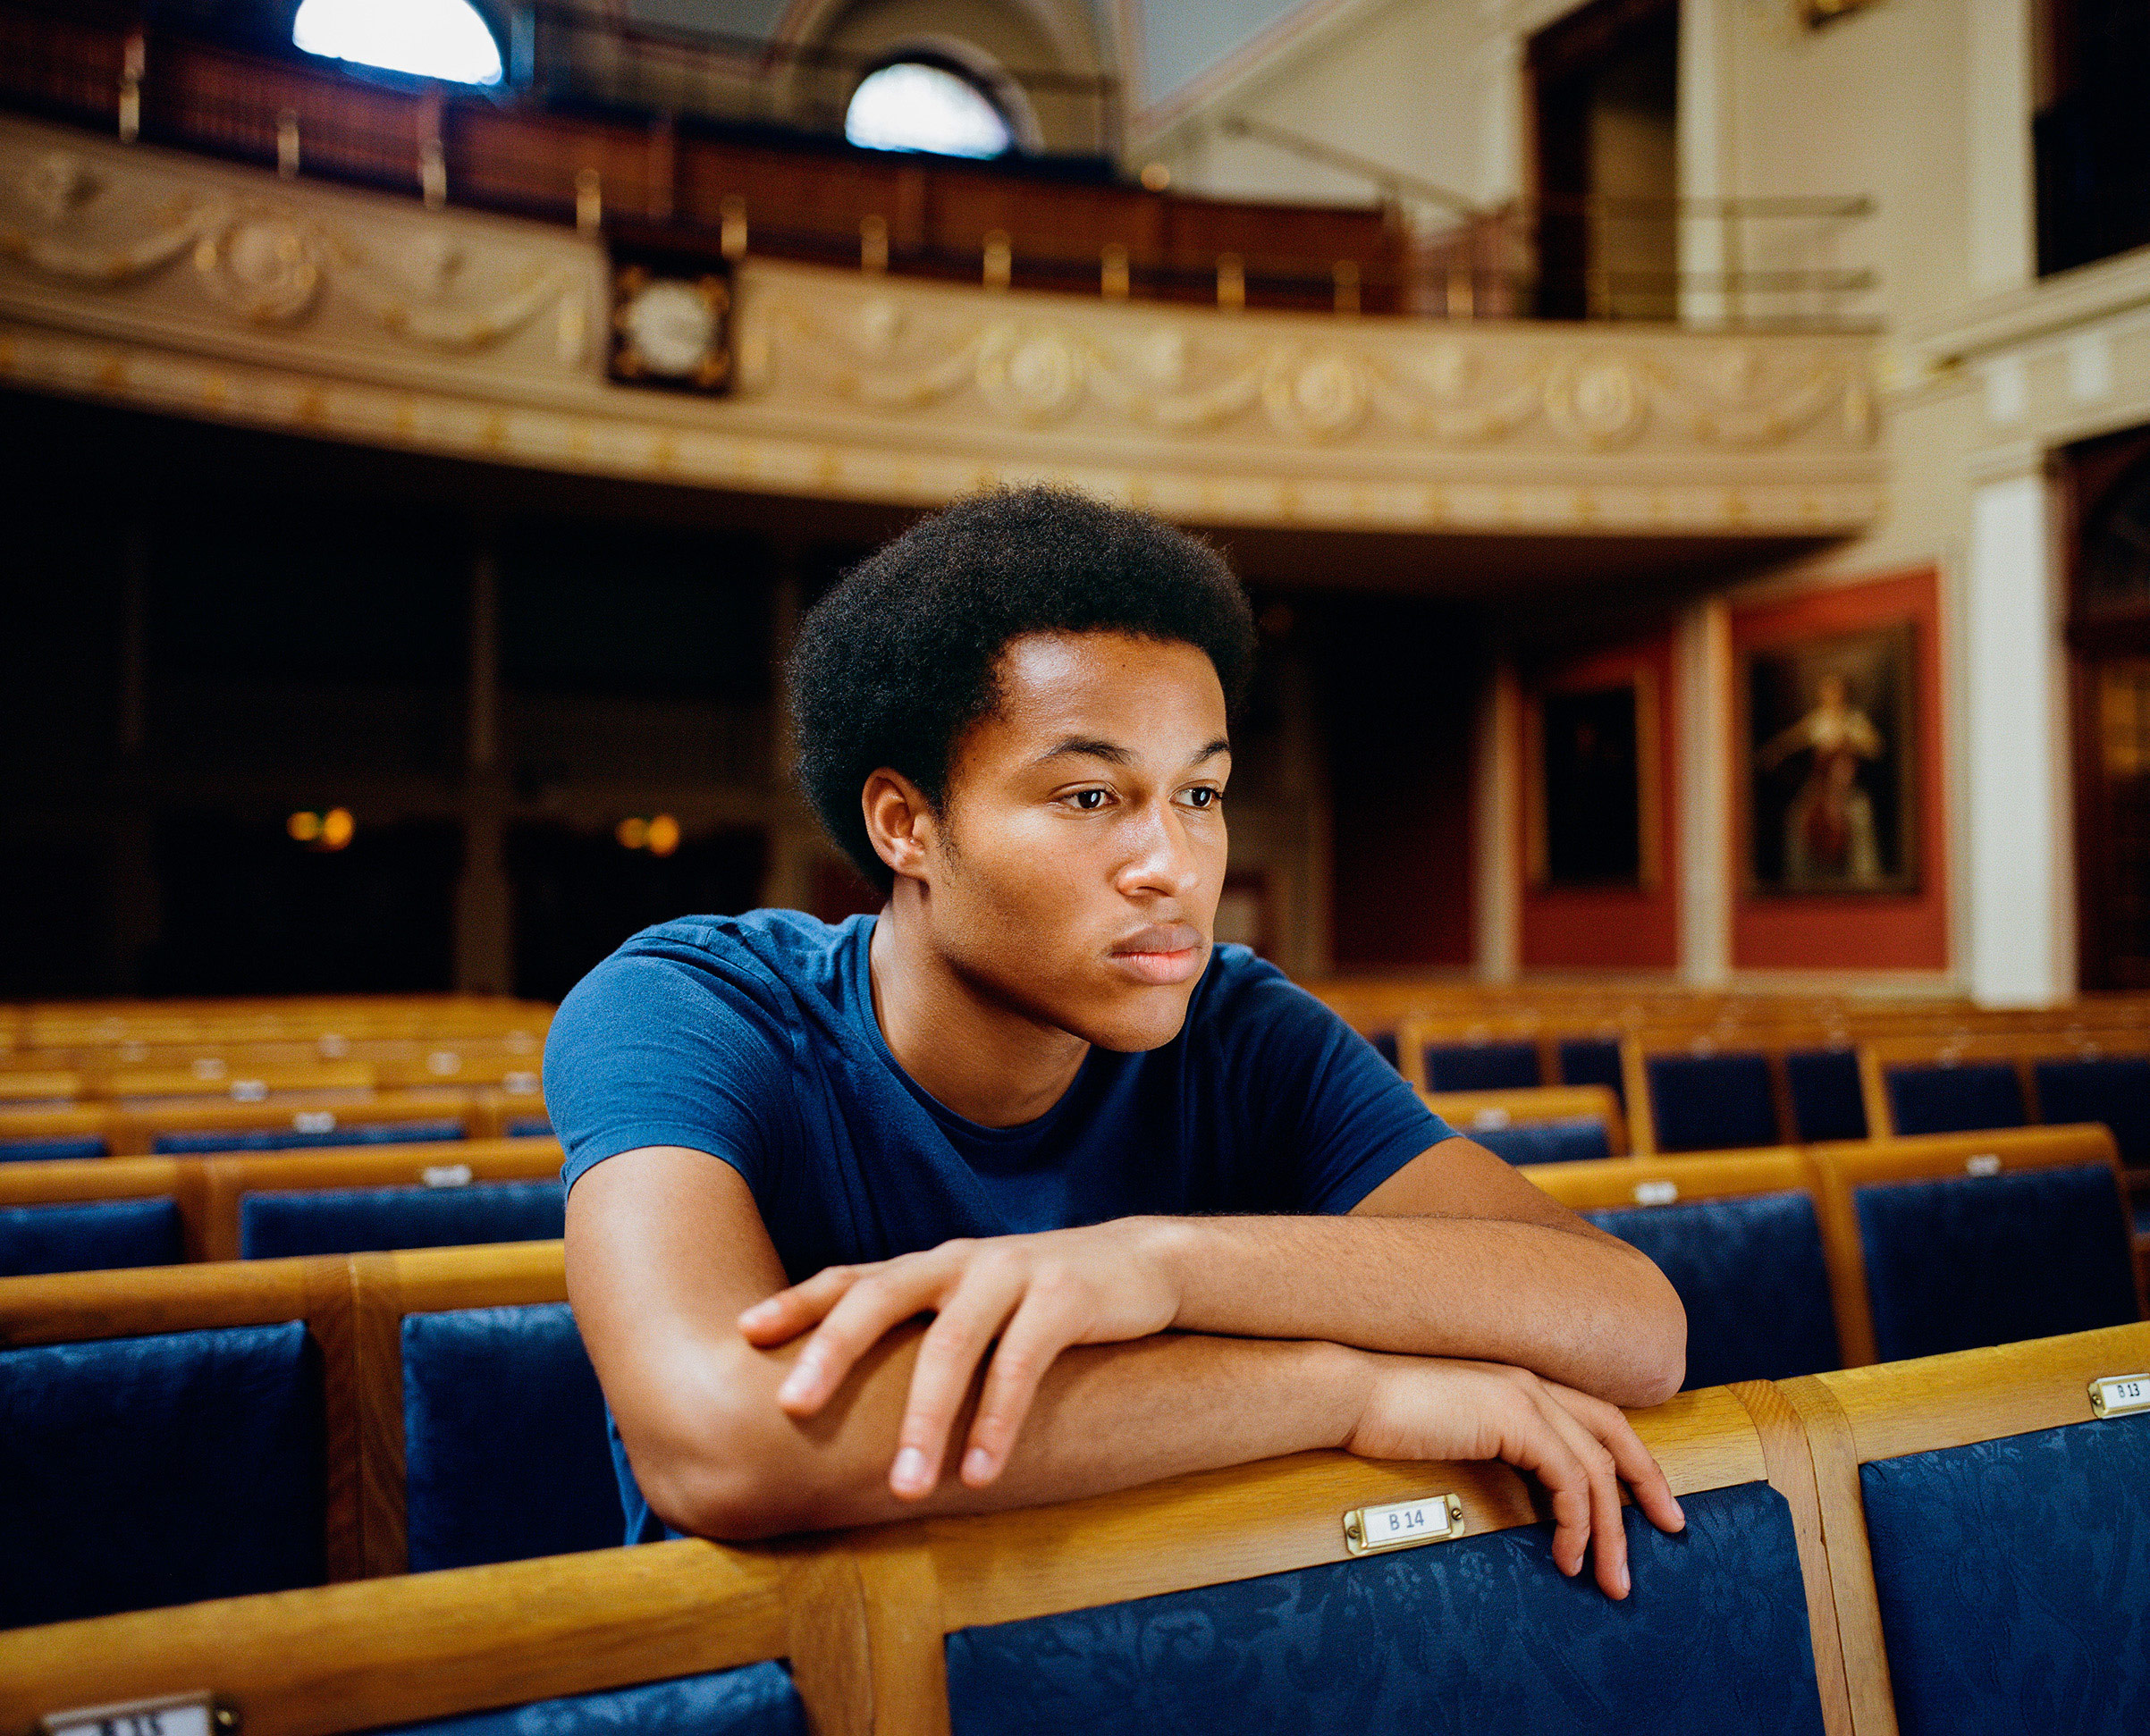 Sheku Kanneh-Mason at the Royal Academy of Music in London on September 8, 2018. (Jooney Woodward for TIME)